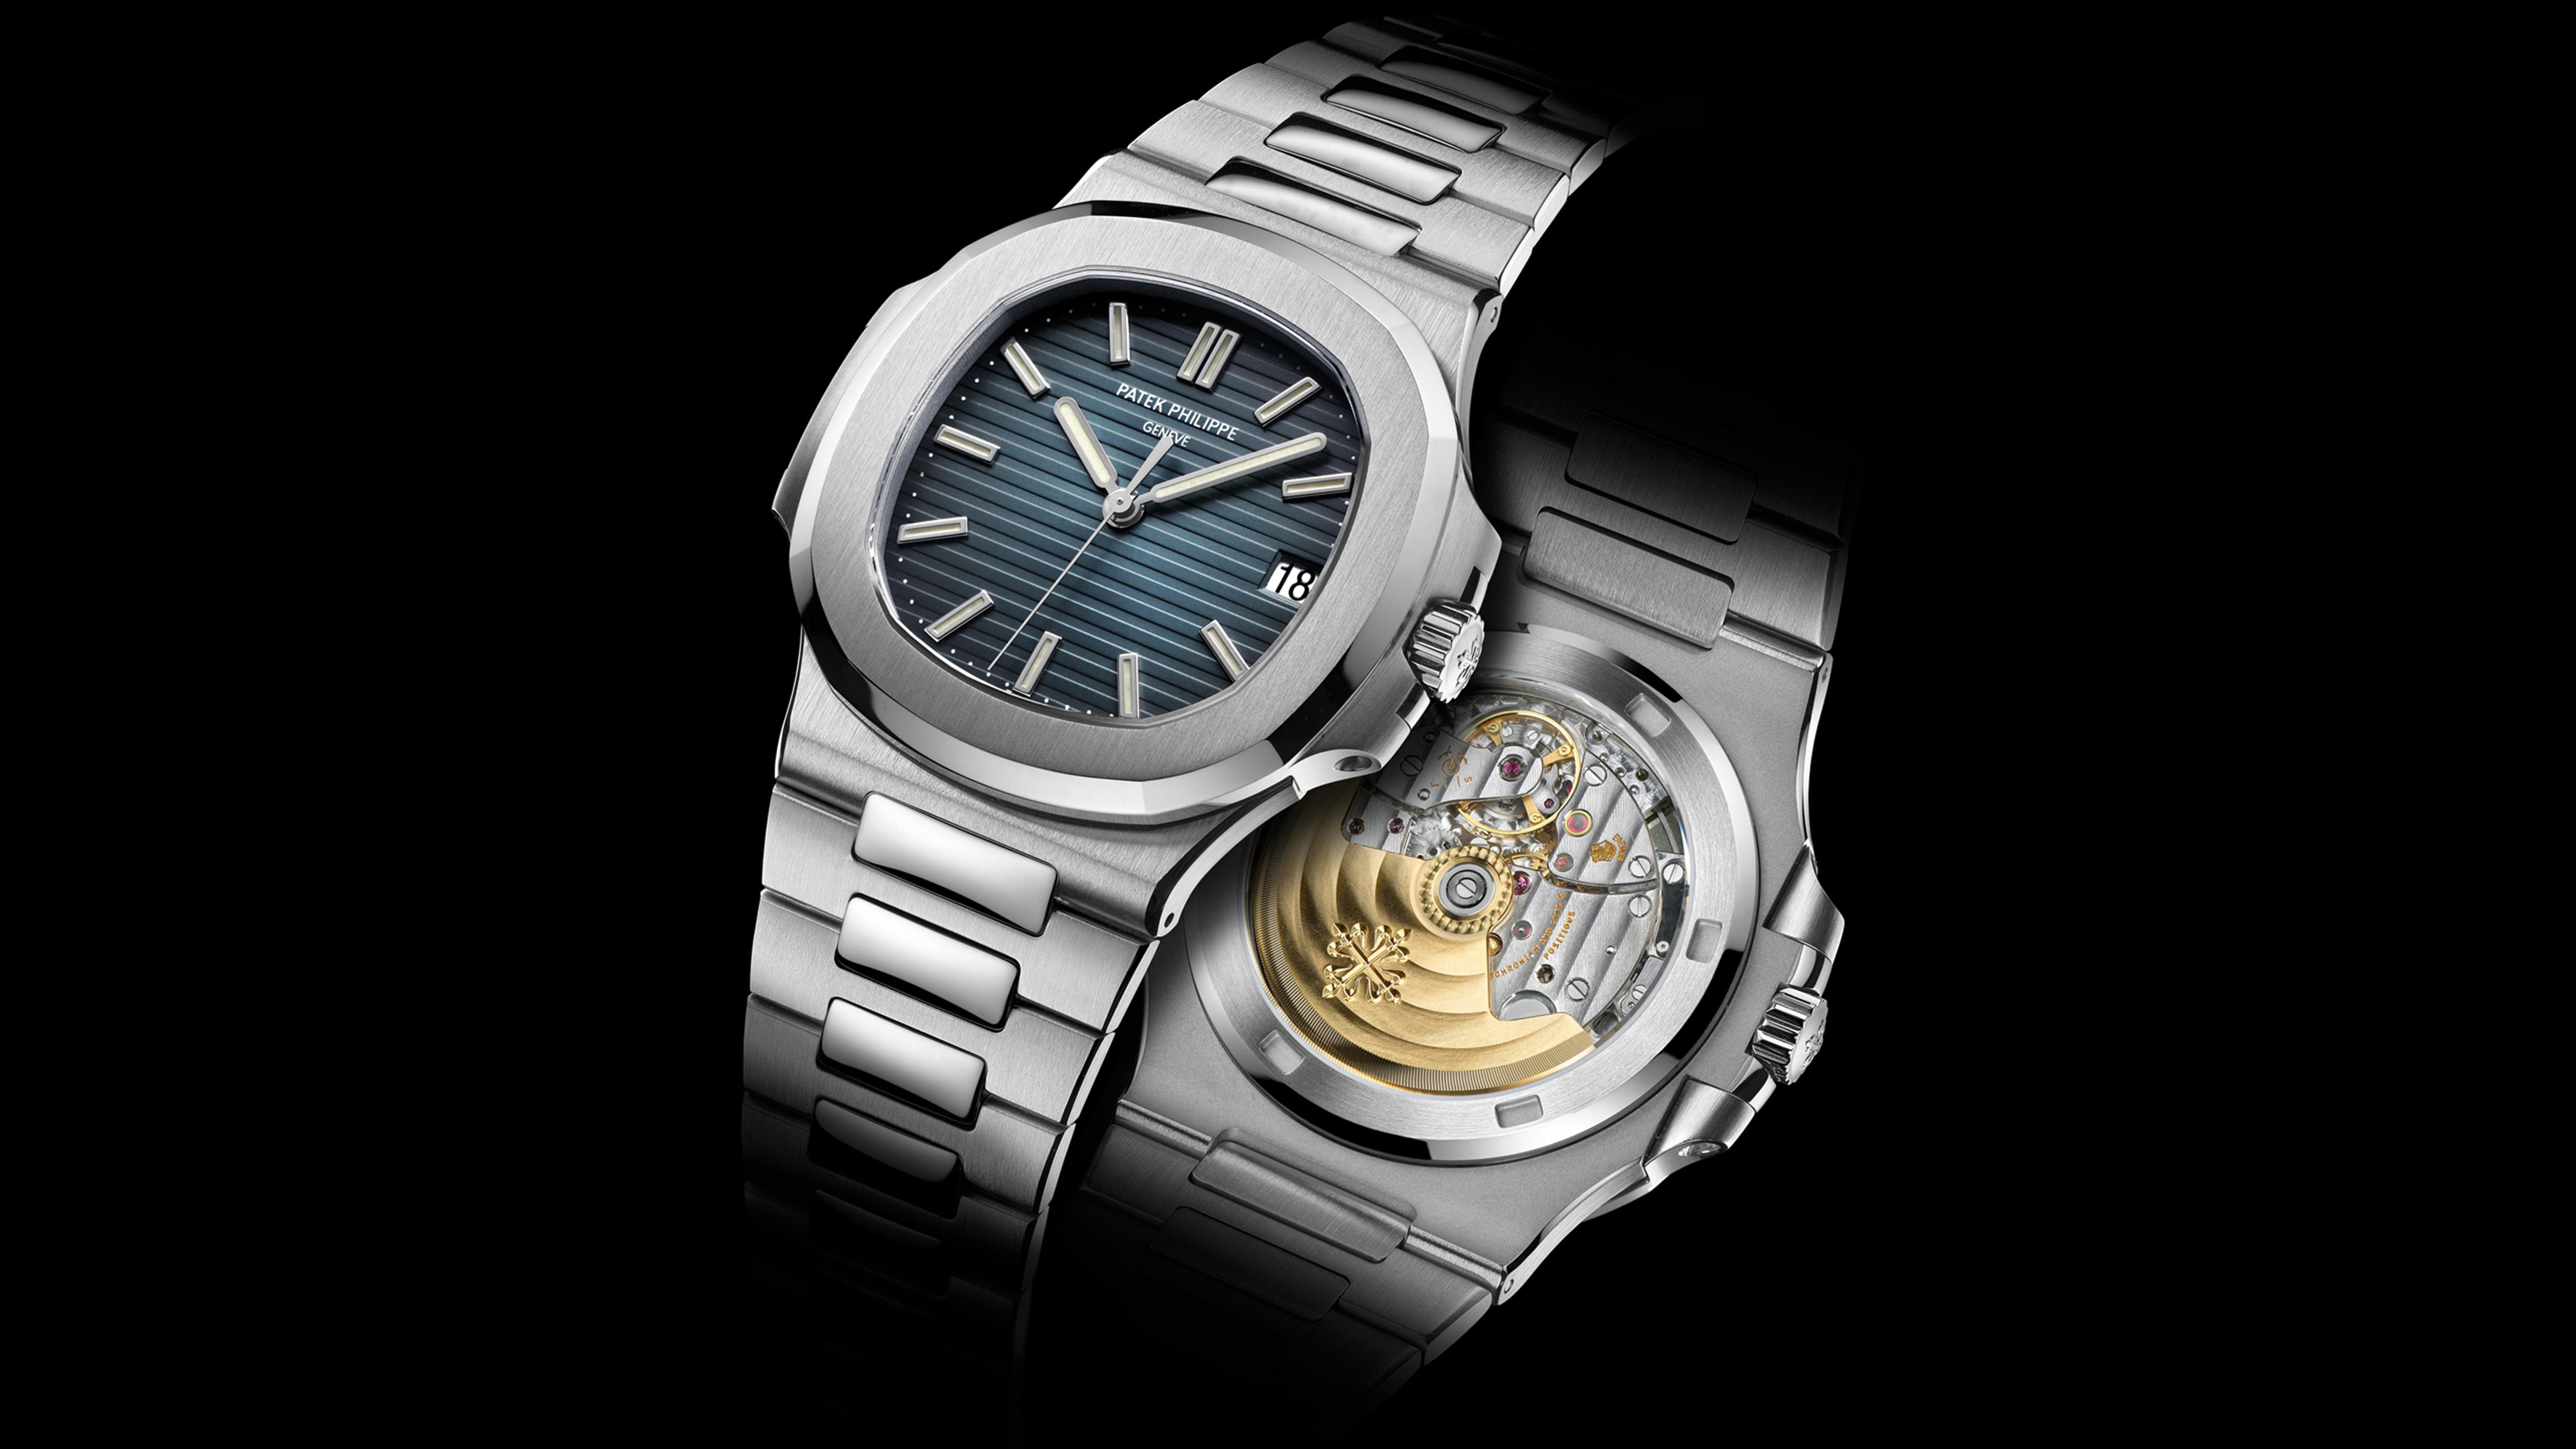 You can now buy Philippe watches online the first time, Rolex follow? |